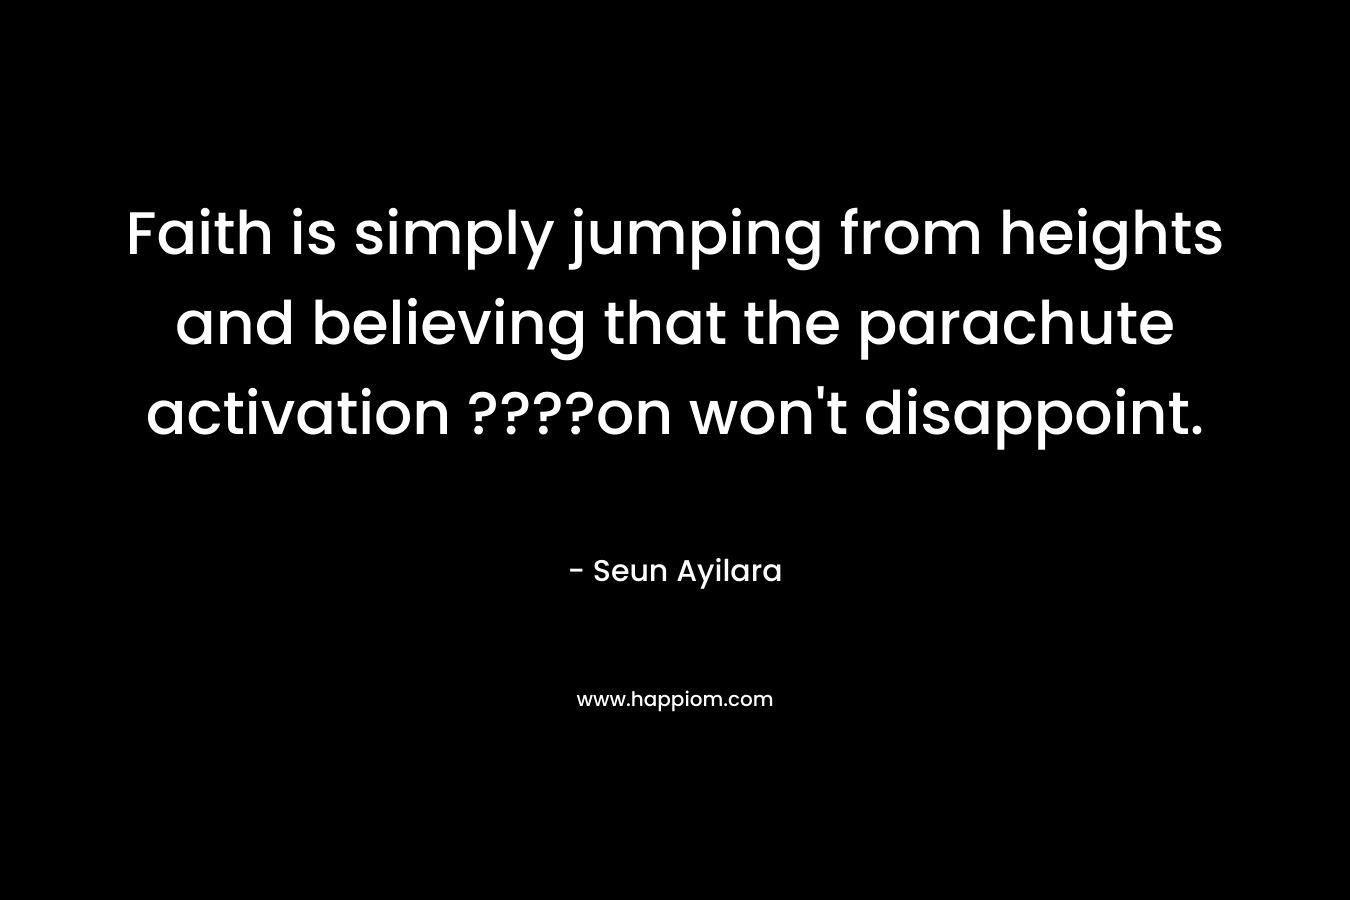 Faith is simply jumping from heights and believing that the parachute activation ????on won’t disappoint. – Seun Ayilara